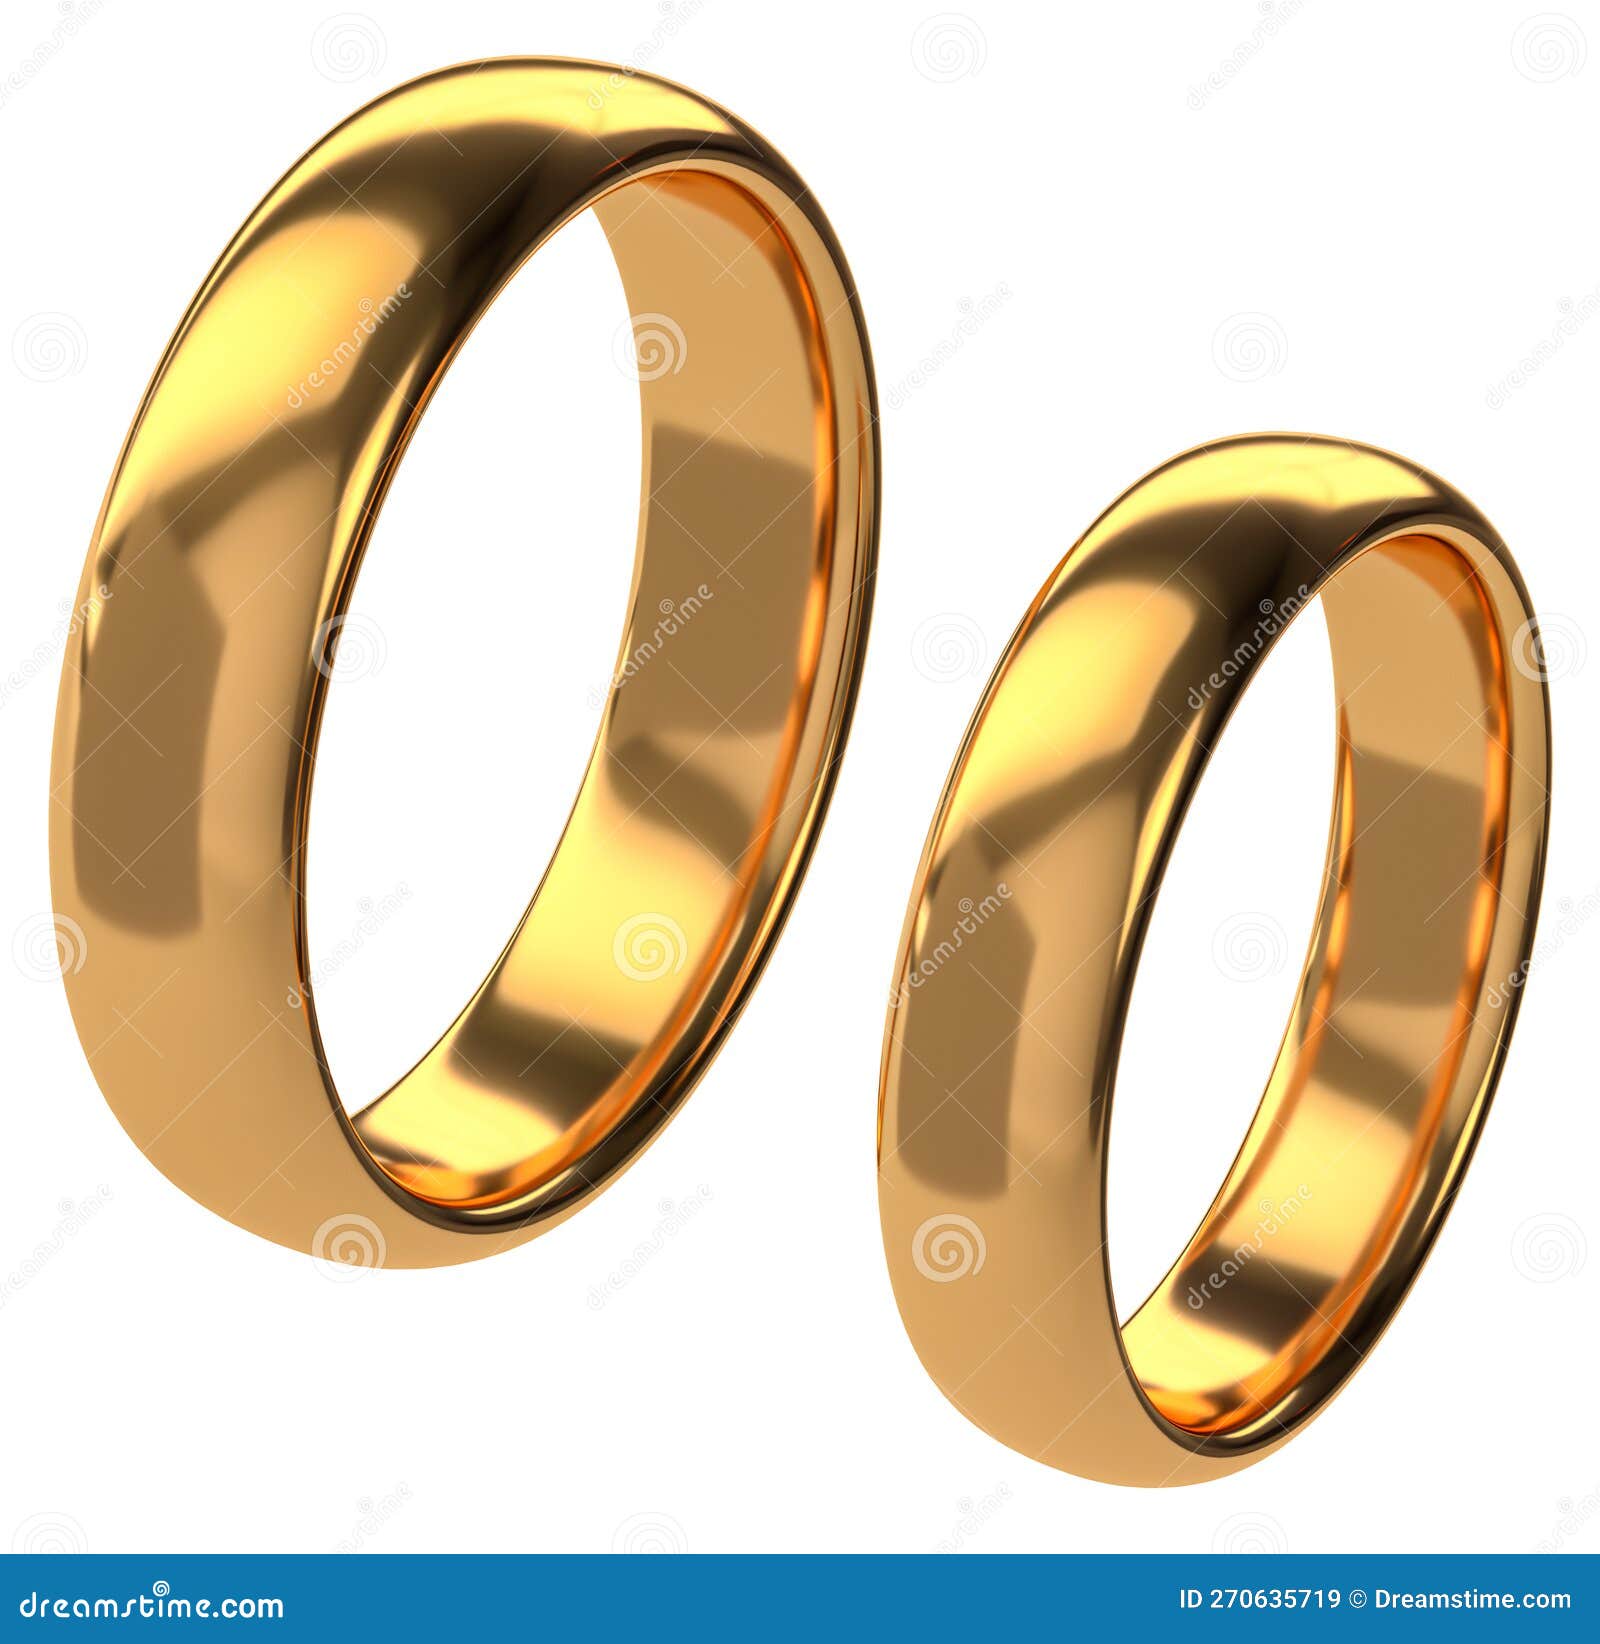 Amazon.com: Gualiy Free Engraving Couples Rings Stainless Steel High  Polished Matte Finished Wedding Bands and Rings Gold Rings Women 6 and Men  10: Clothing, Shoes & Jewelry